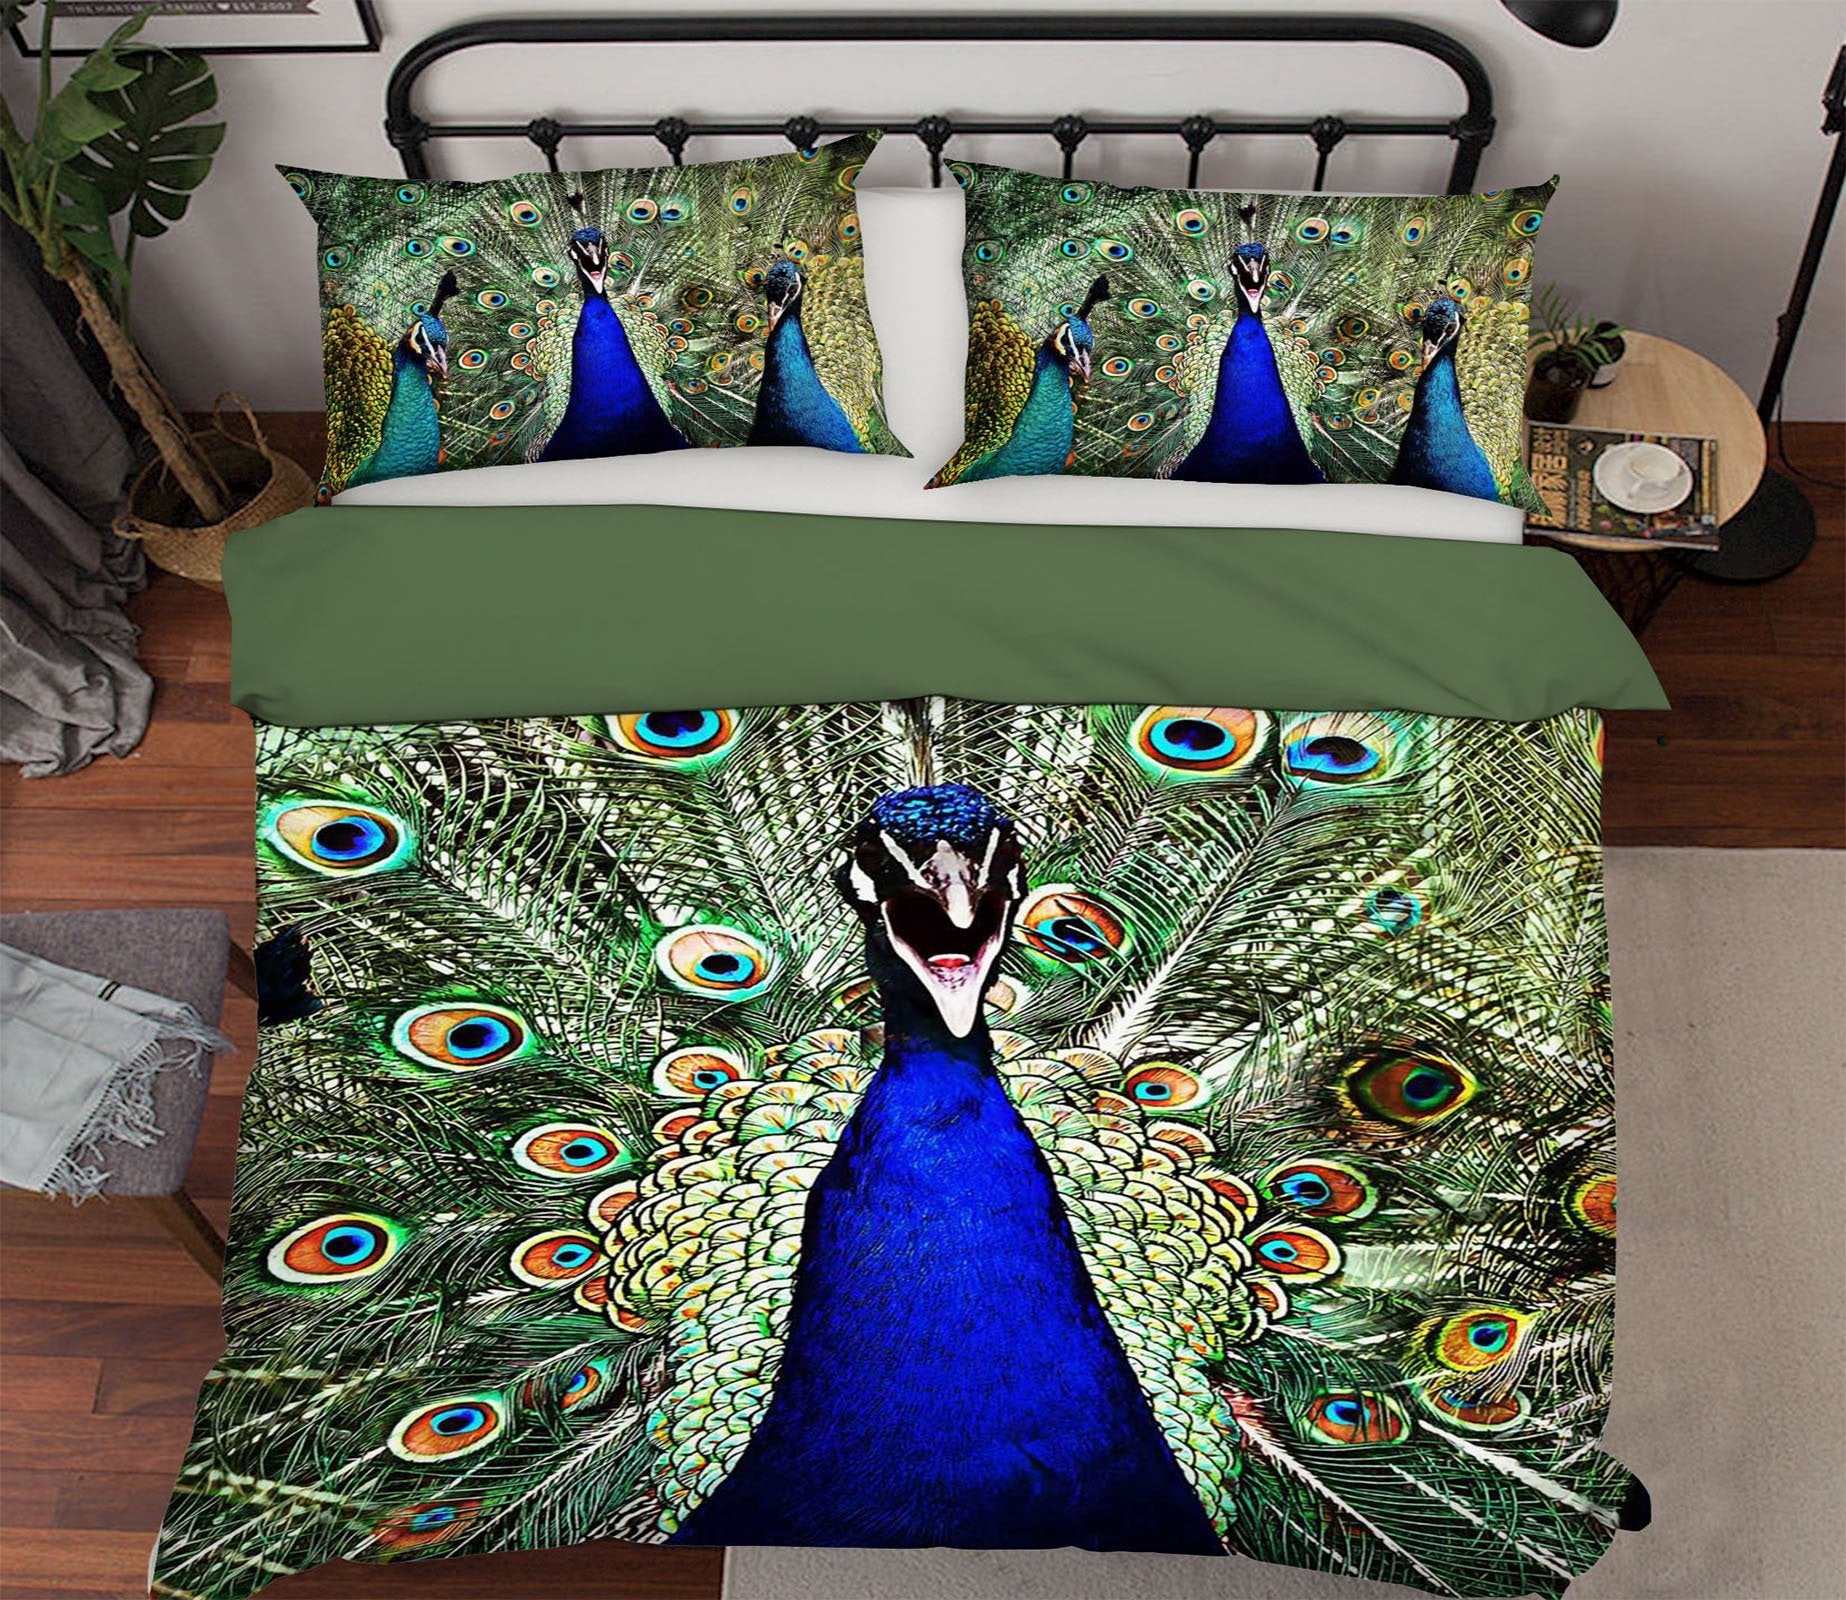 3D Peacock 1981 Bed Pillowcases Quilt Quiet Covers AJ Creativity Home 